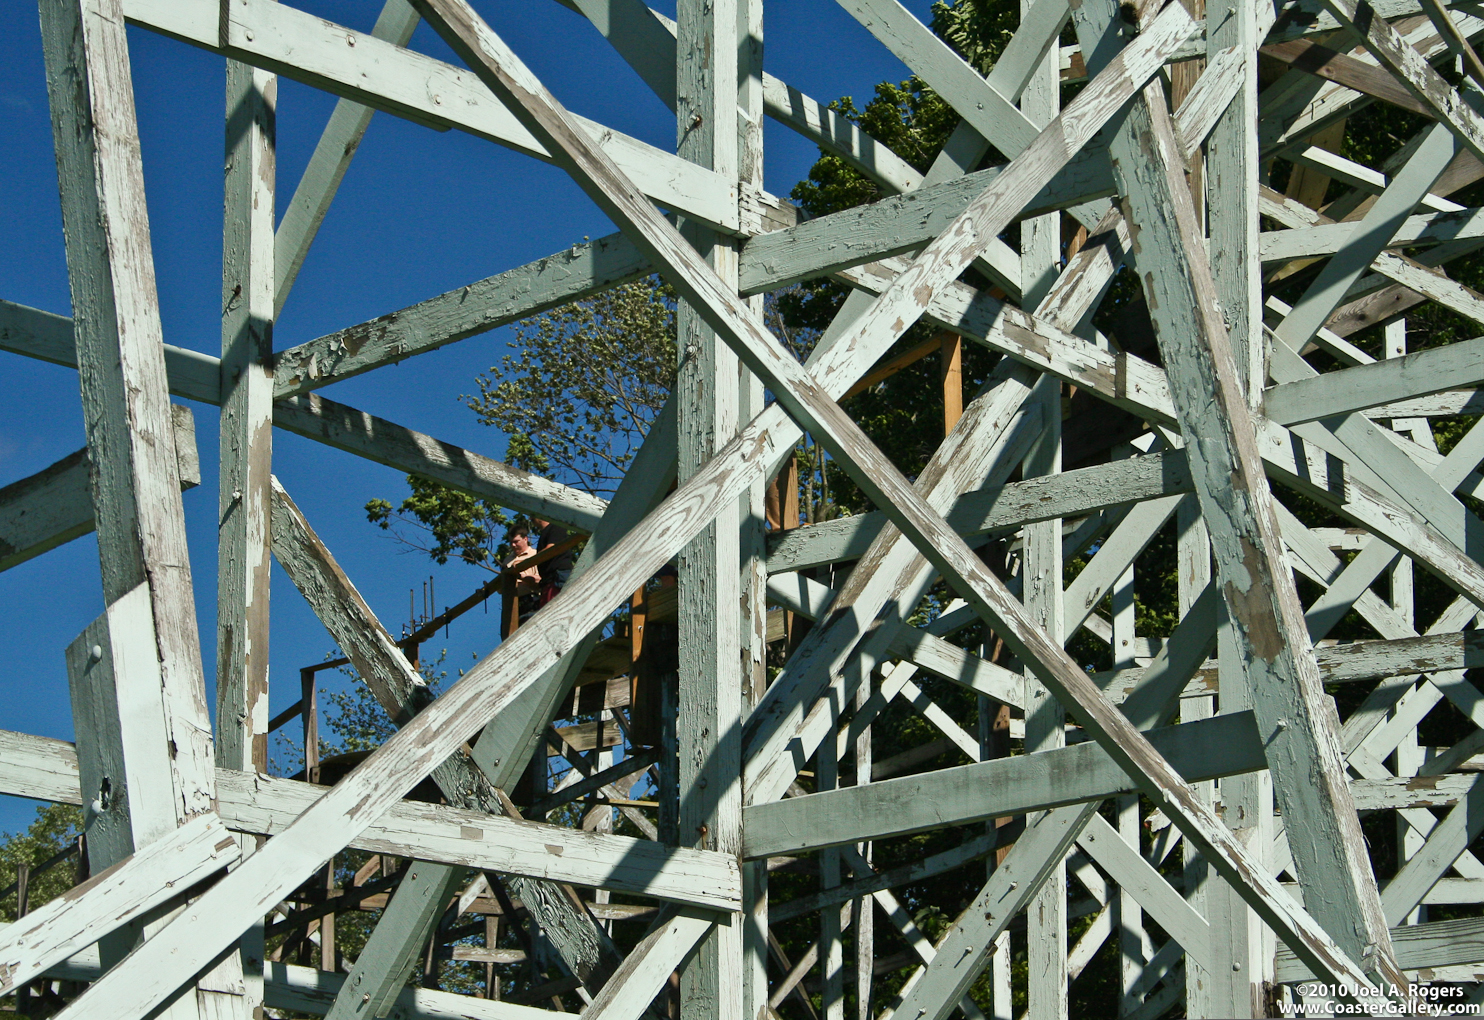 Working on a wooden roller coaster